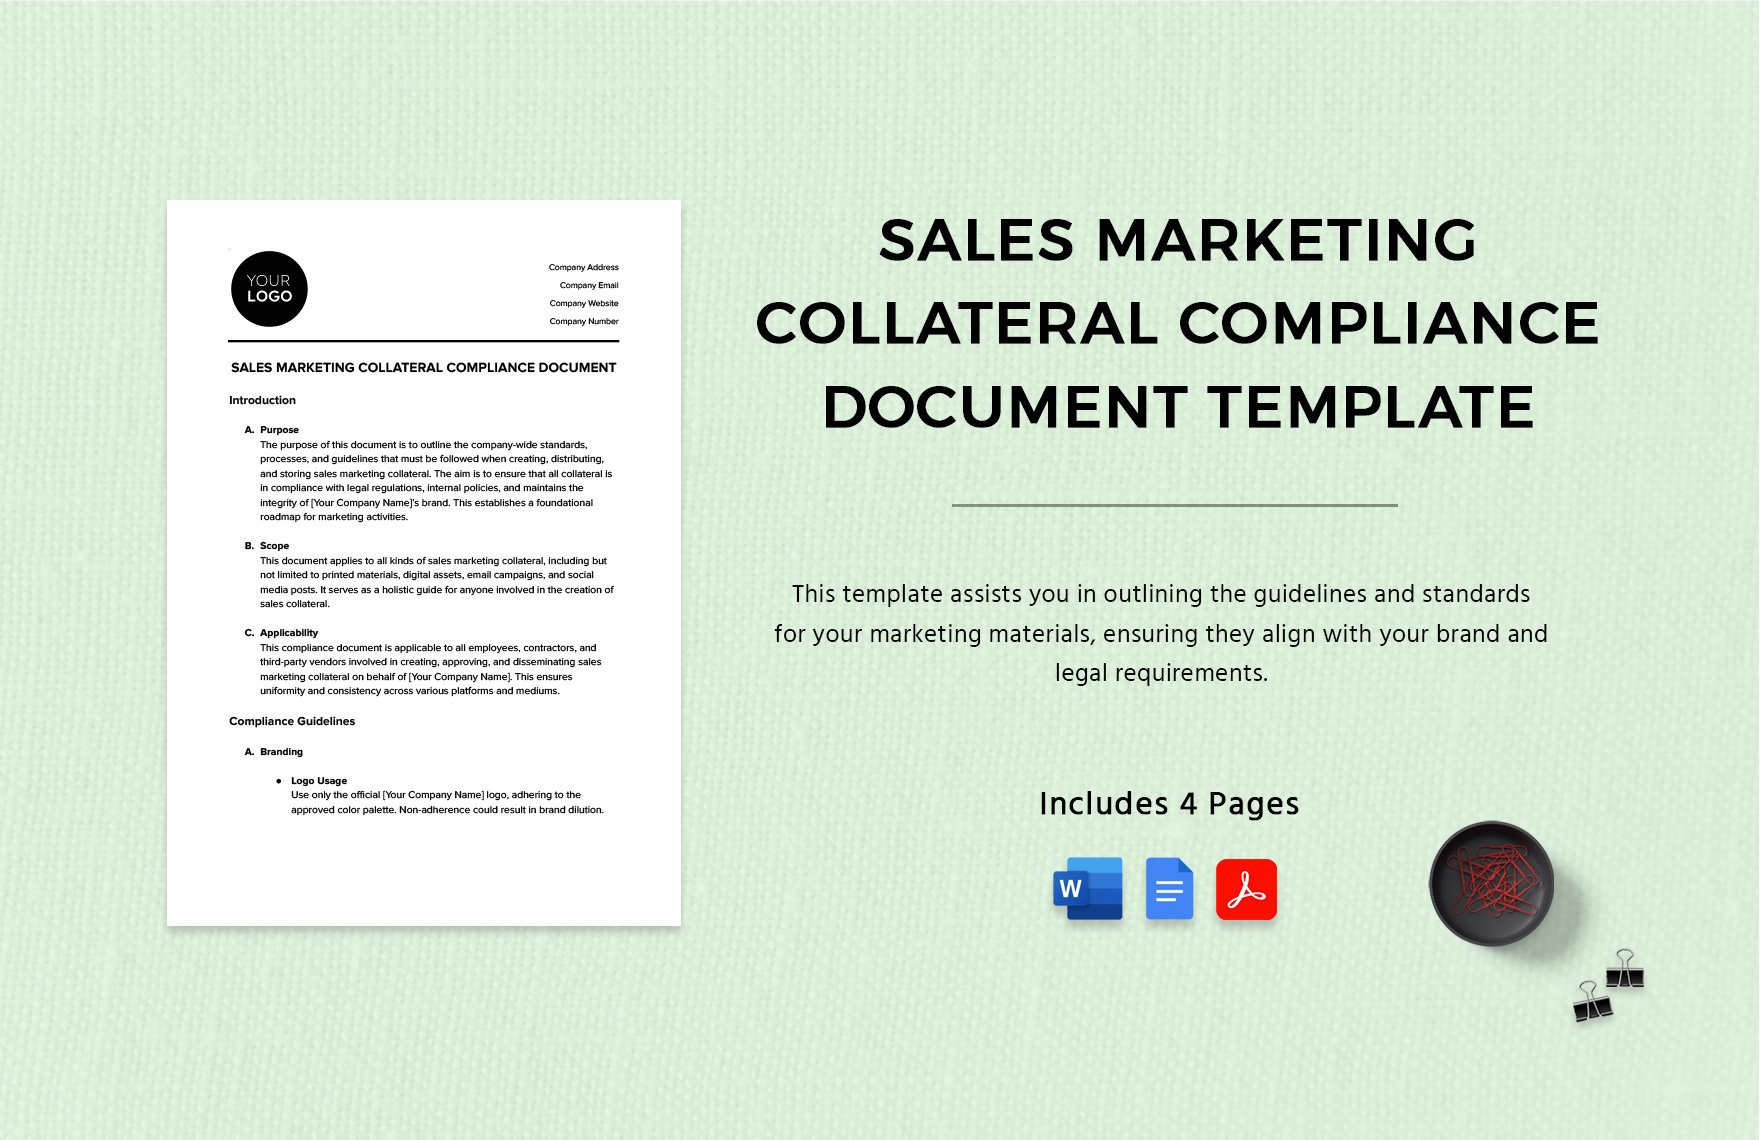 Sales Marketing Collateral Compliance Document Template